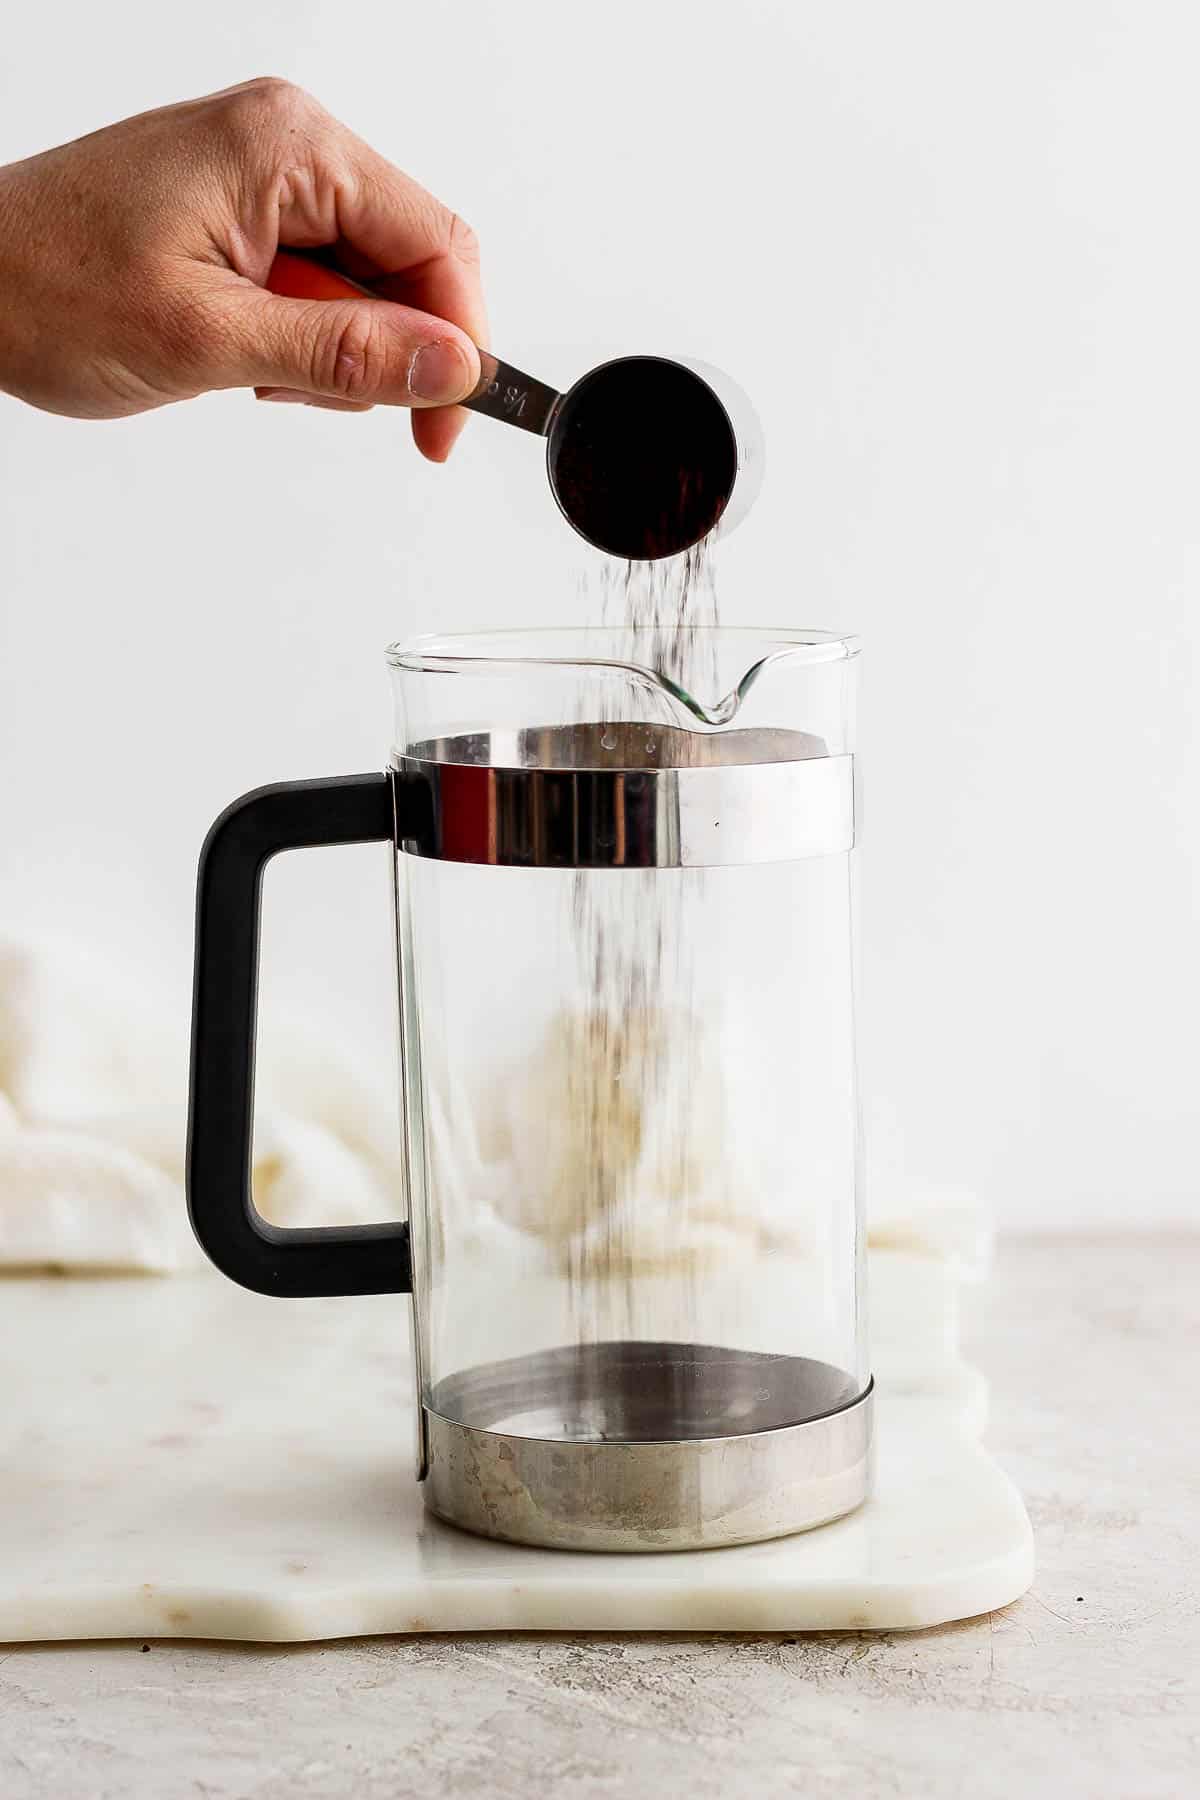 Someone pouring a scoop of coarse coffee grounds into a french press.